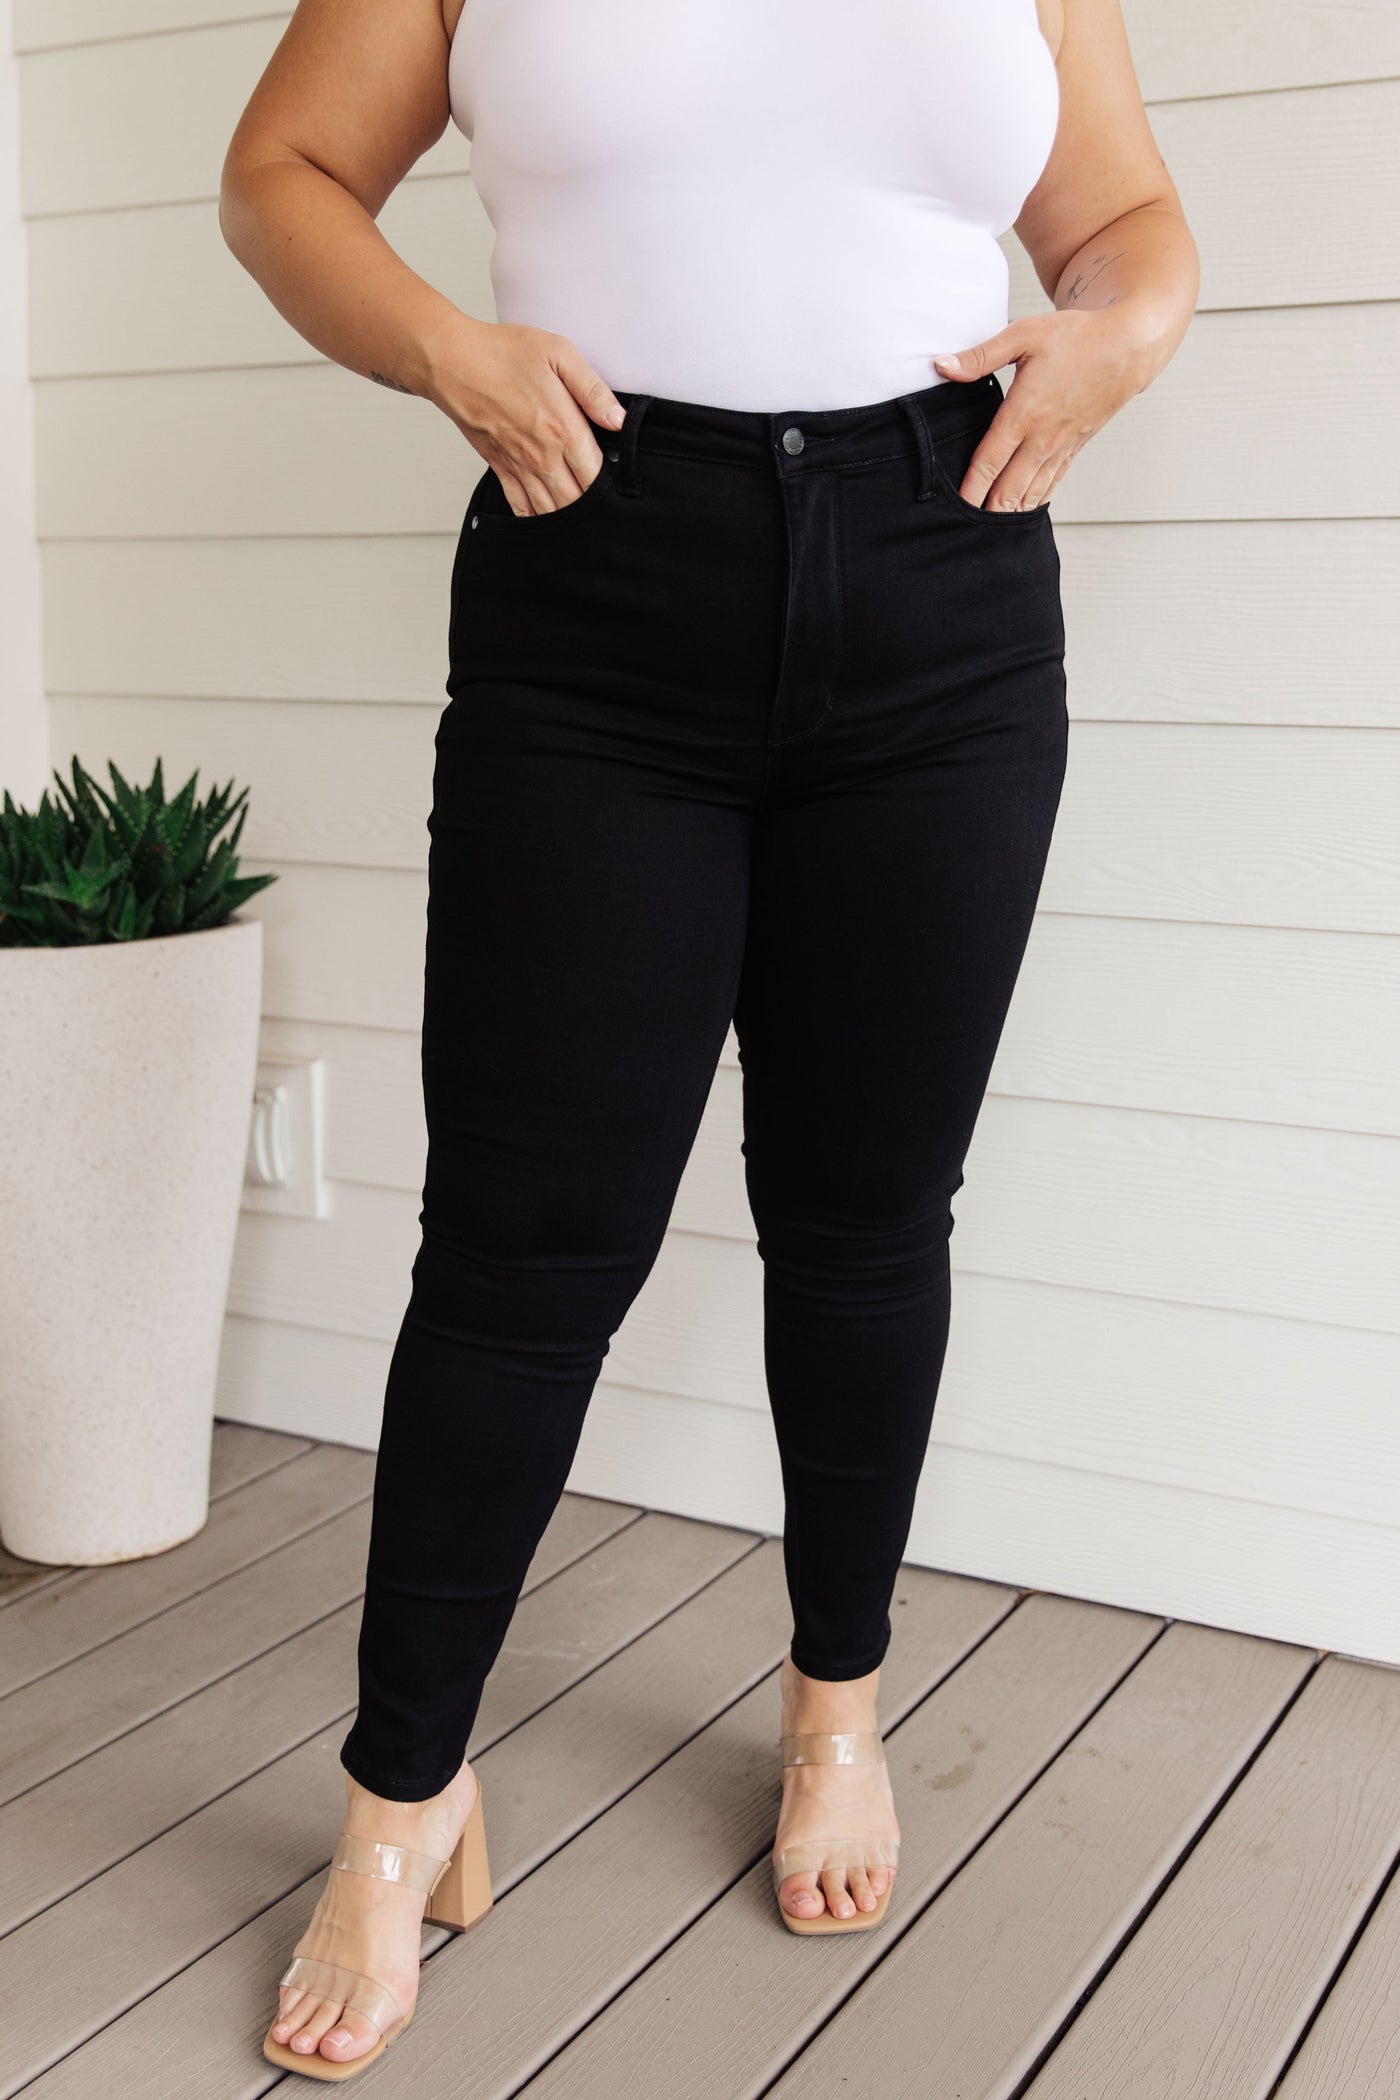 Judy Blue | Audrey Heps High Rise Control Top Classic Black Skinny Jeans